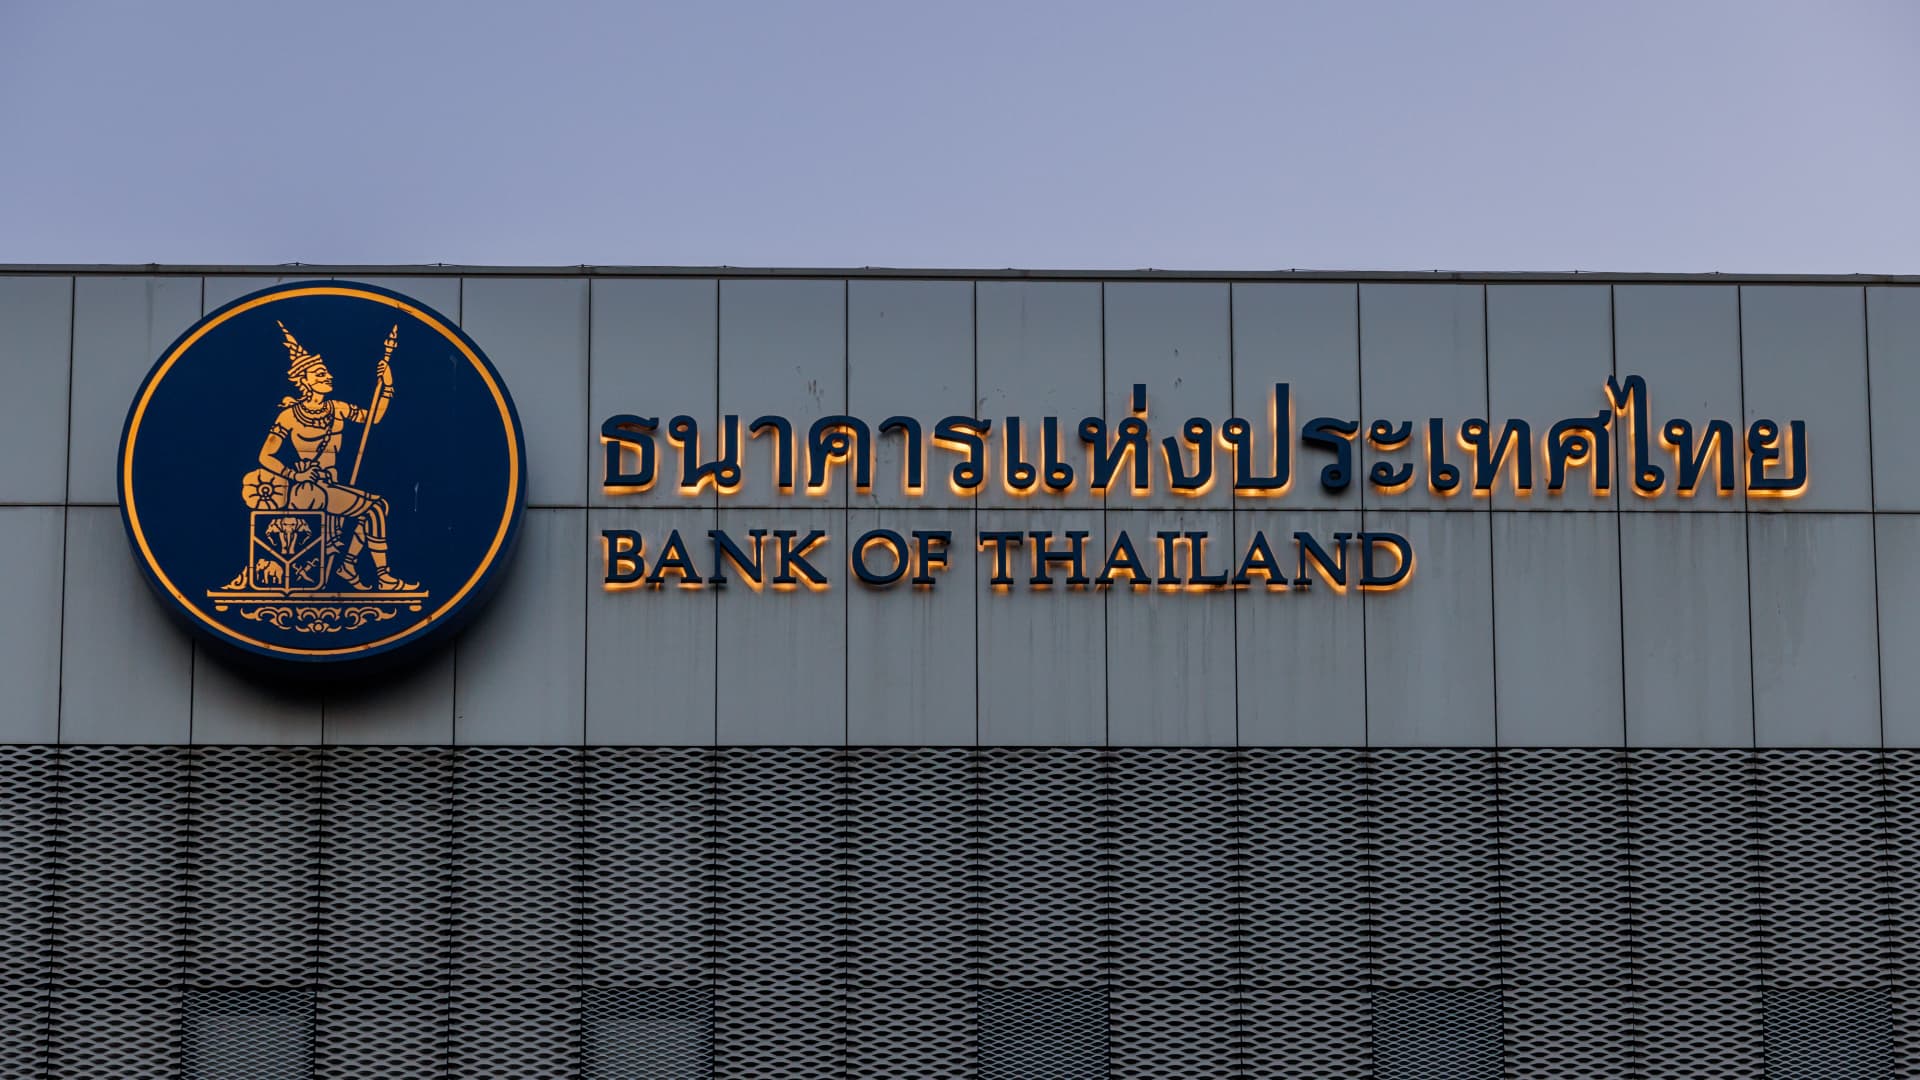 Thailand’s central bank will act independently and not cave to ‘political’ pressure, governor says